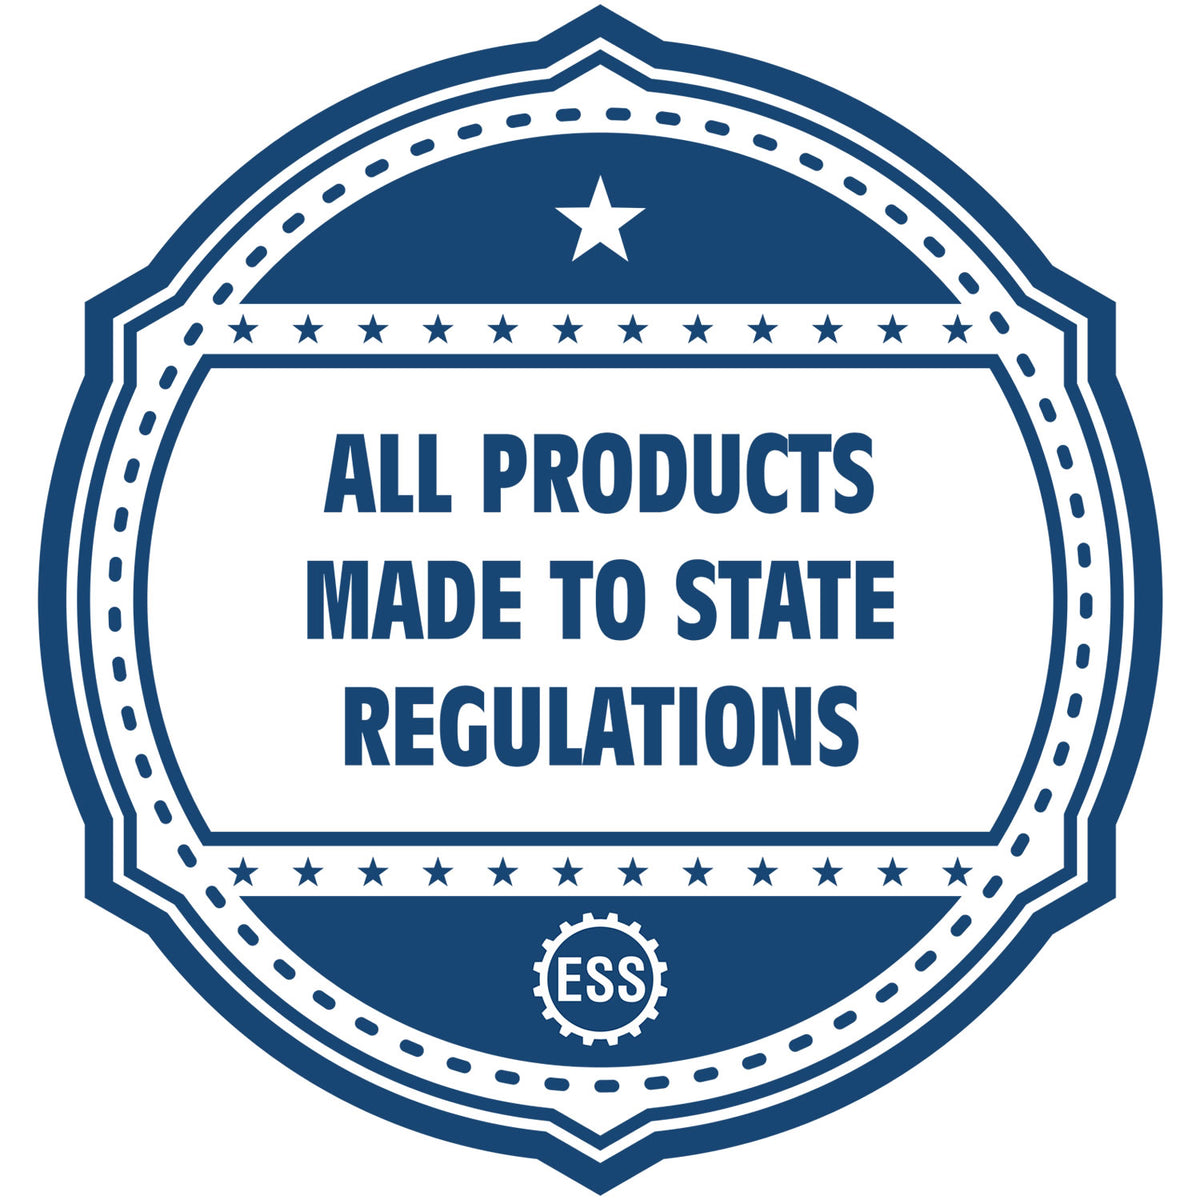 An icon or badge element for the Slim Pre-Inked Louisiana Professional Engineer Seal Stamp showing that this product is made in compliance with state regulations.